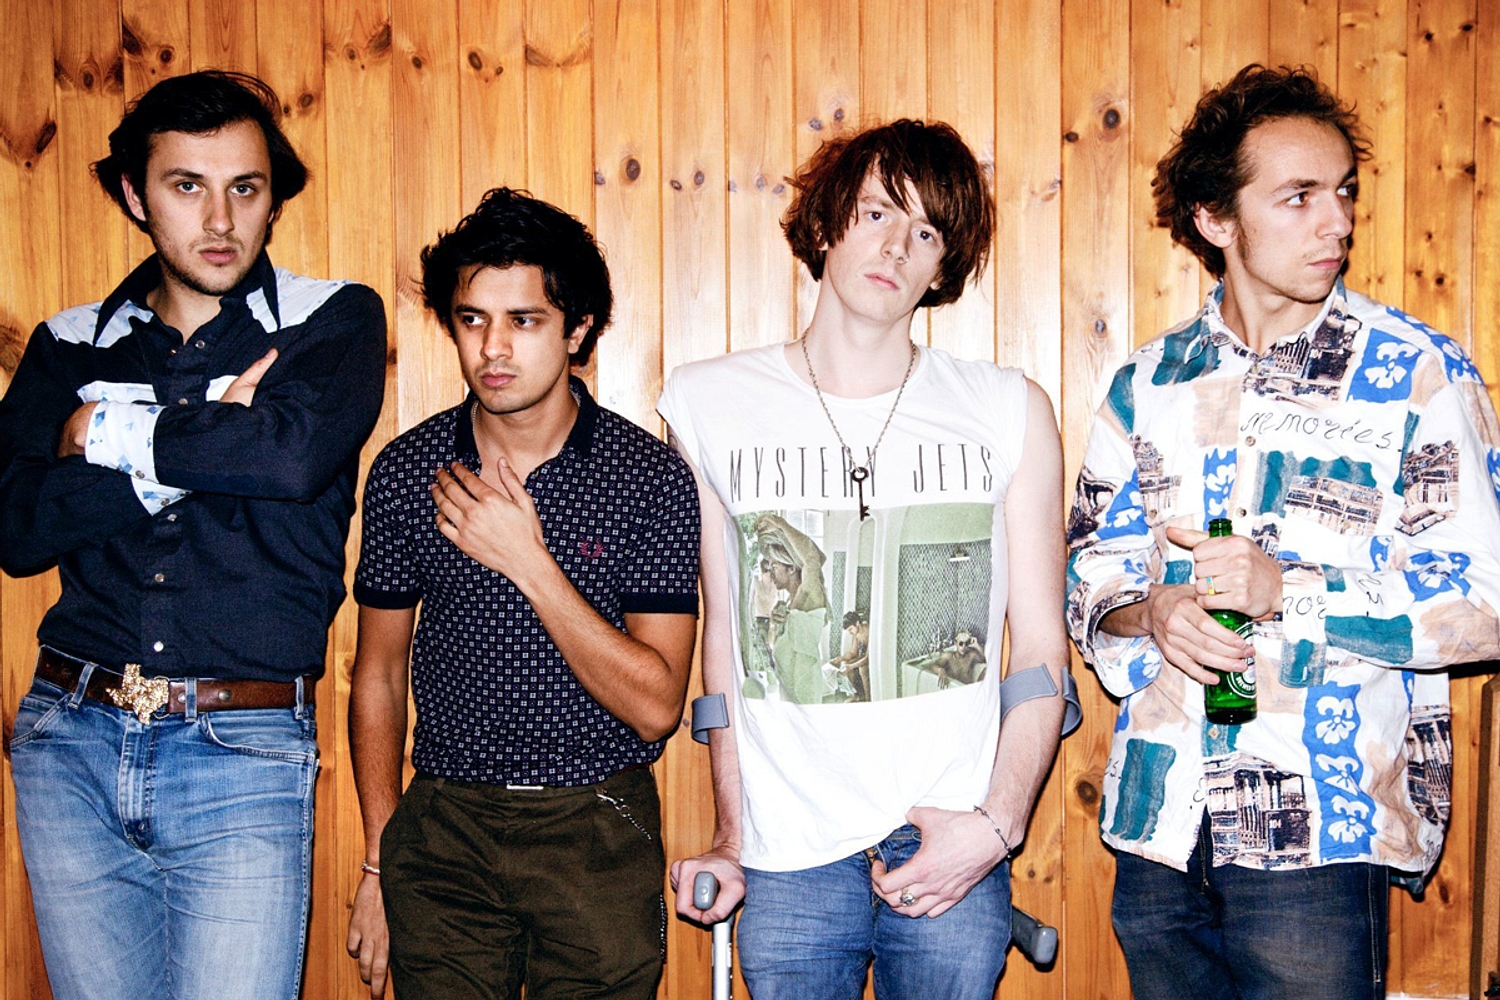 Mystery Jets stream new album ‘Curve of the Earth’